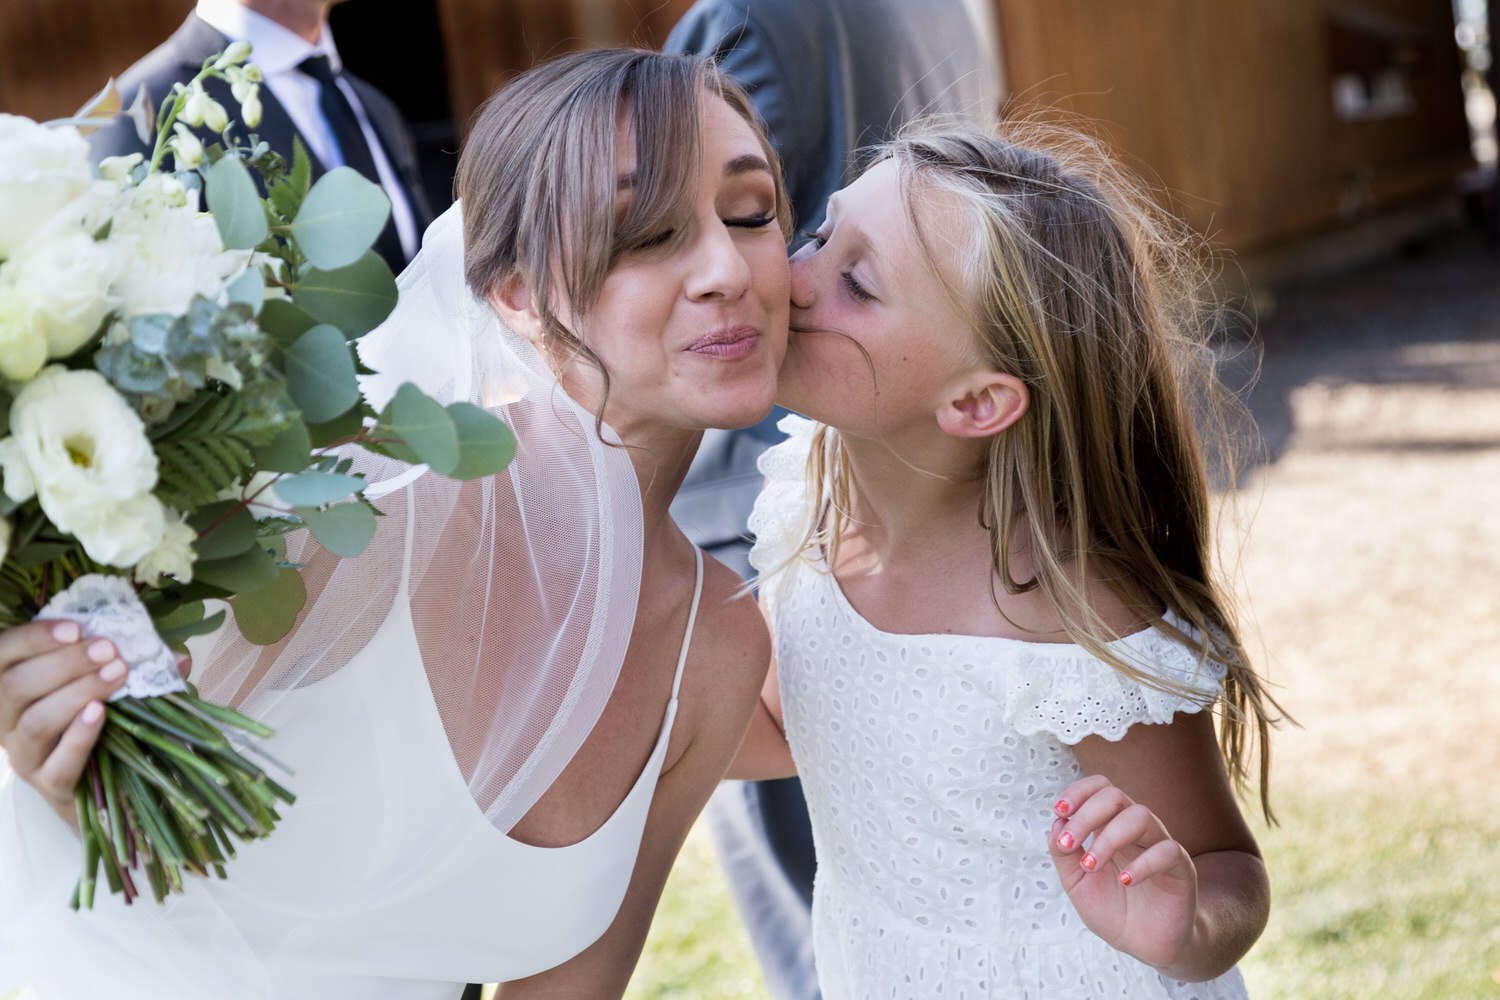 A young flower girl in a white dress kisses the bride on the cheek at an outdoor lawn wedding reception.